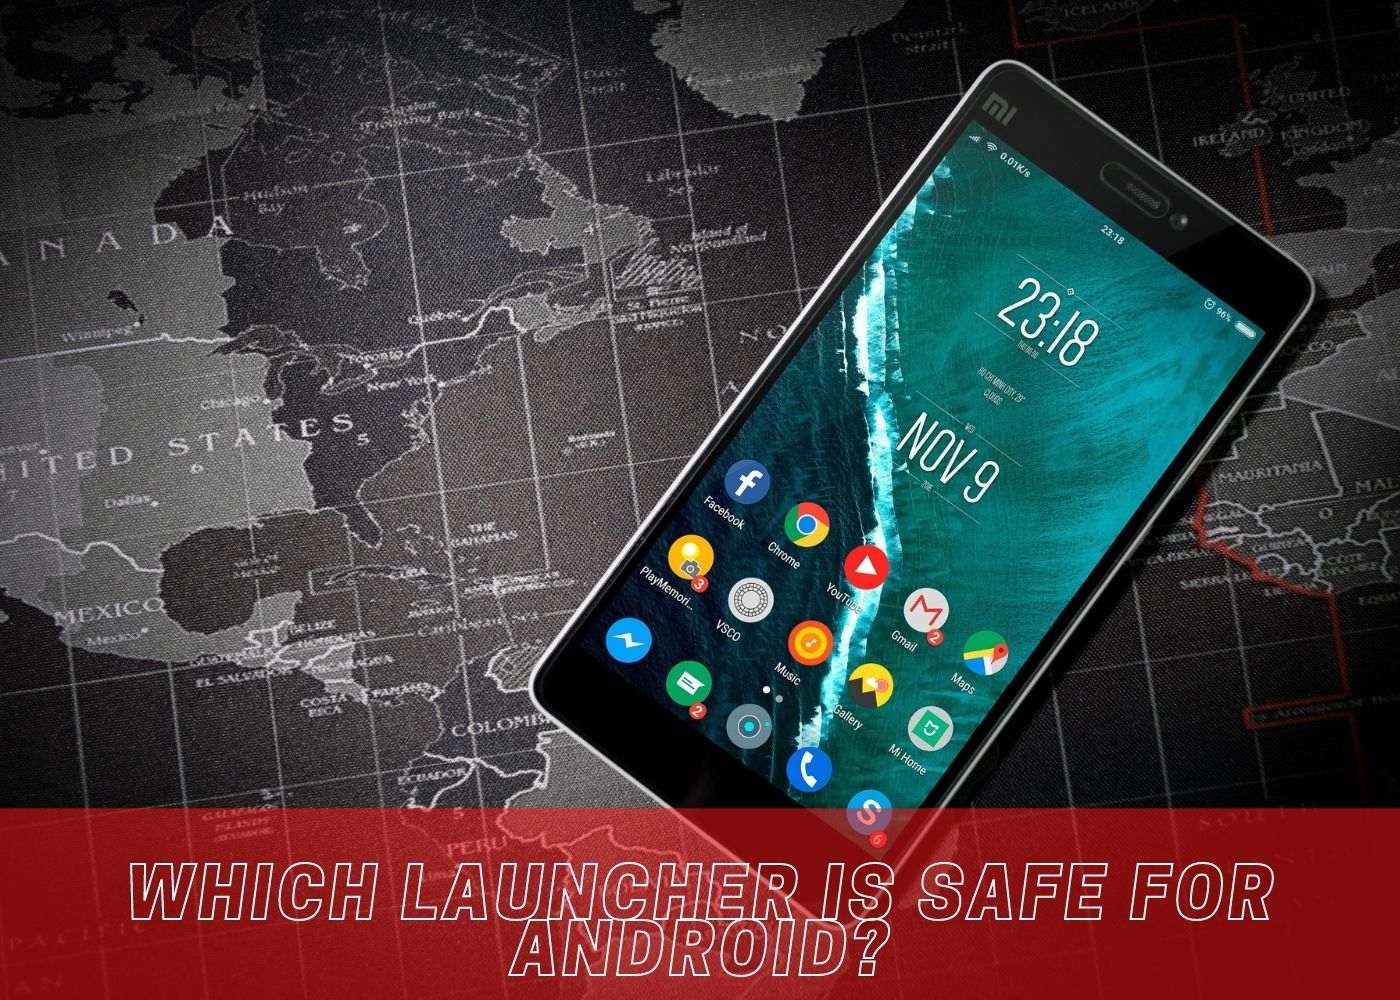 Which launcher is safe for Android?